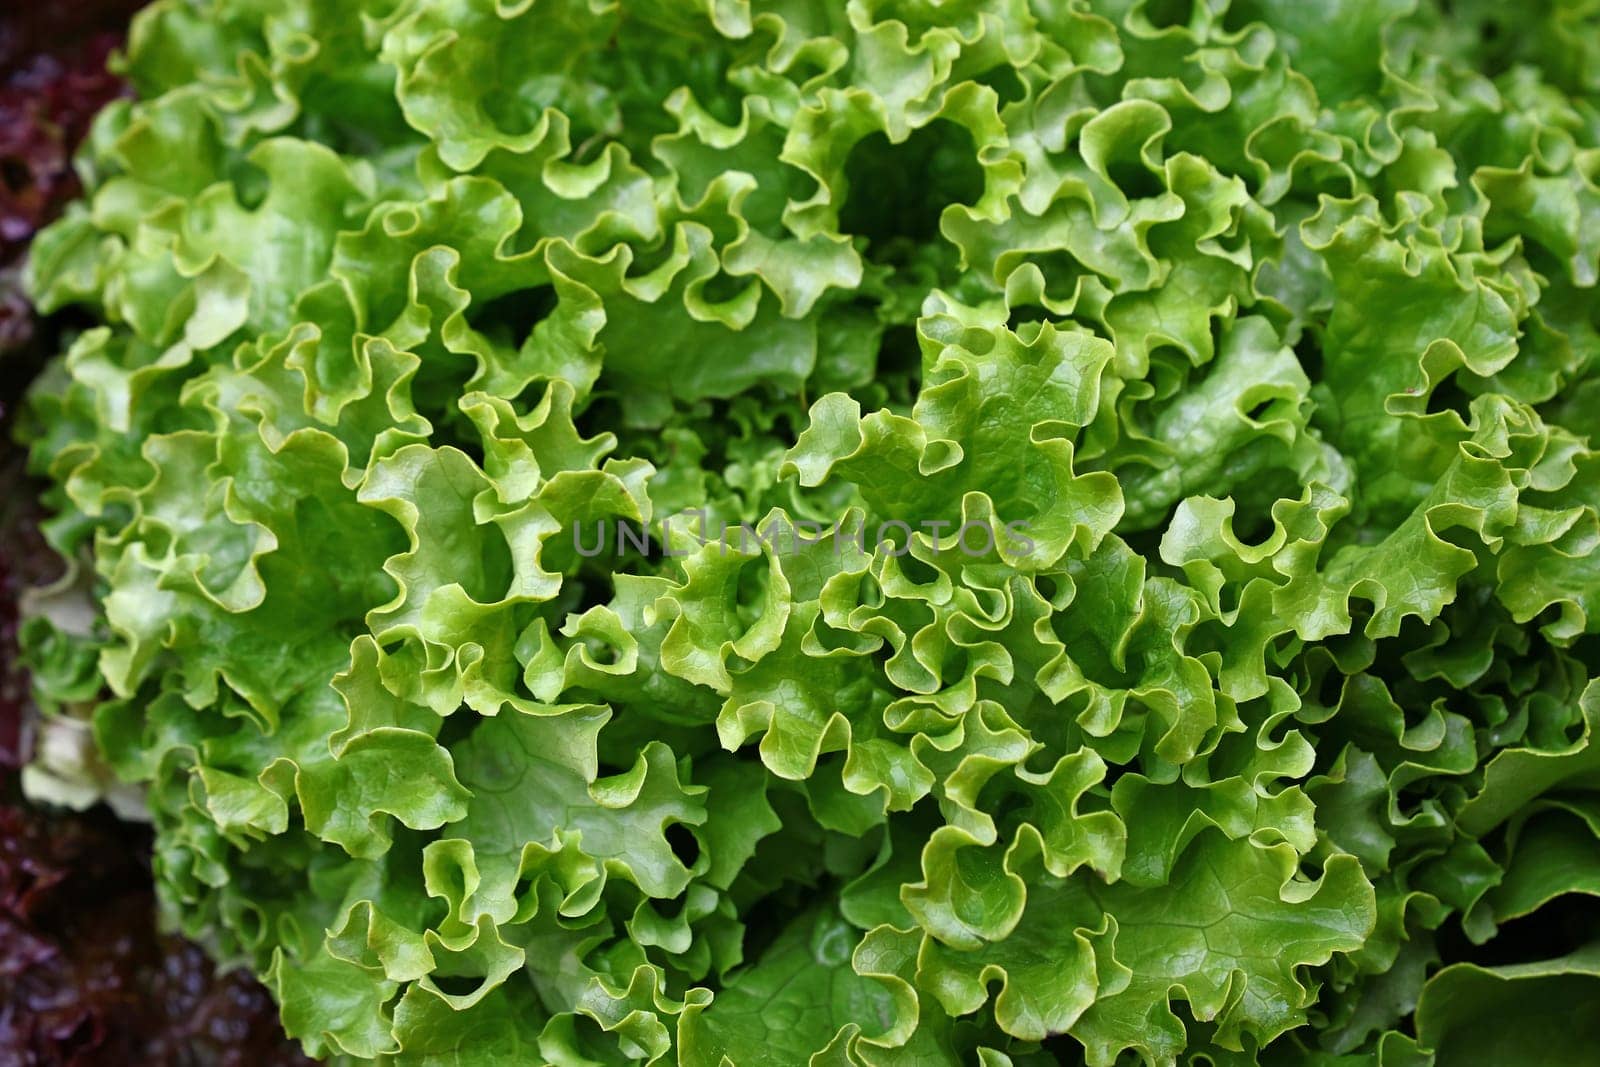 Heap of fresh green lettuce salad on farmers market display, close up, high angle view